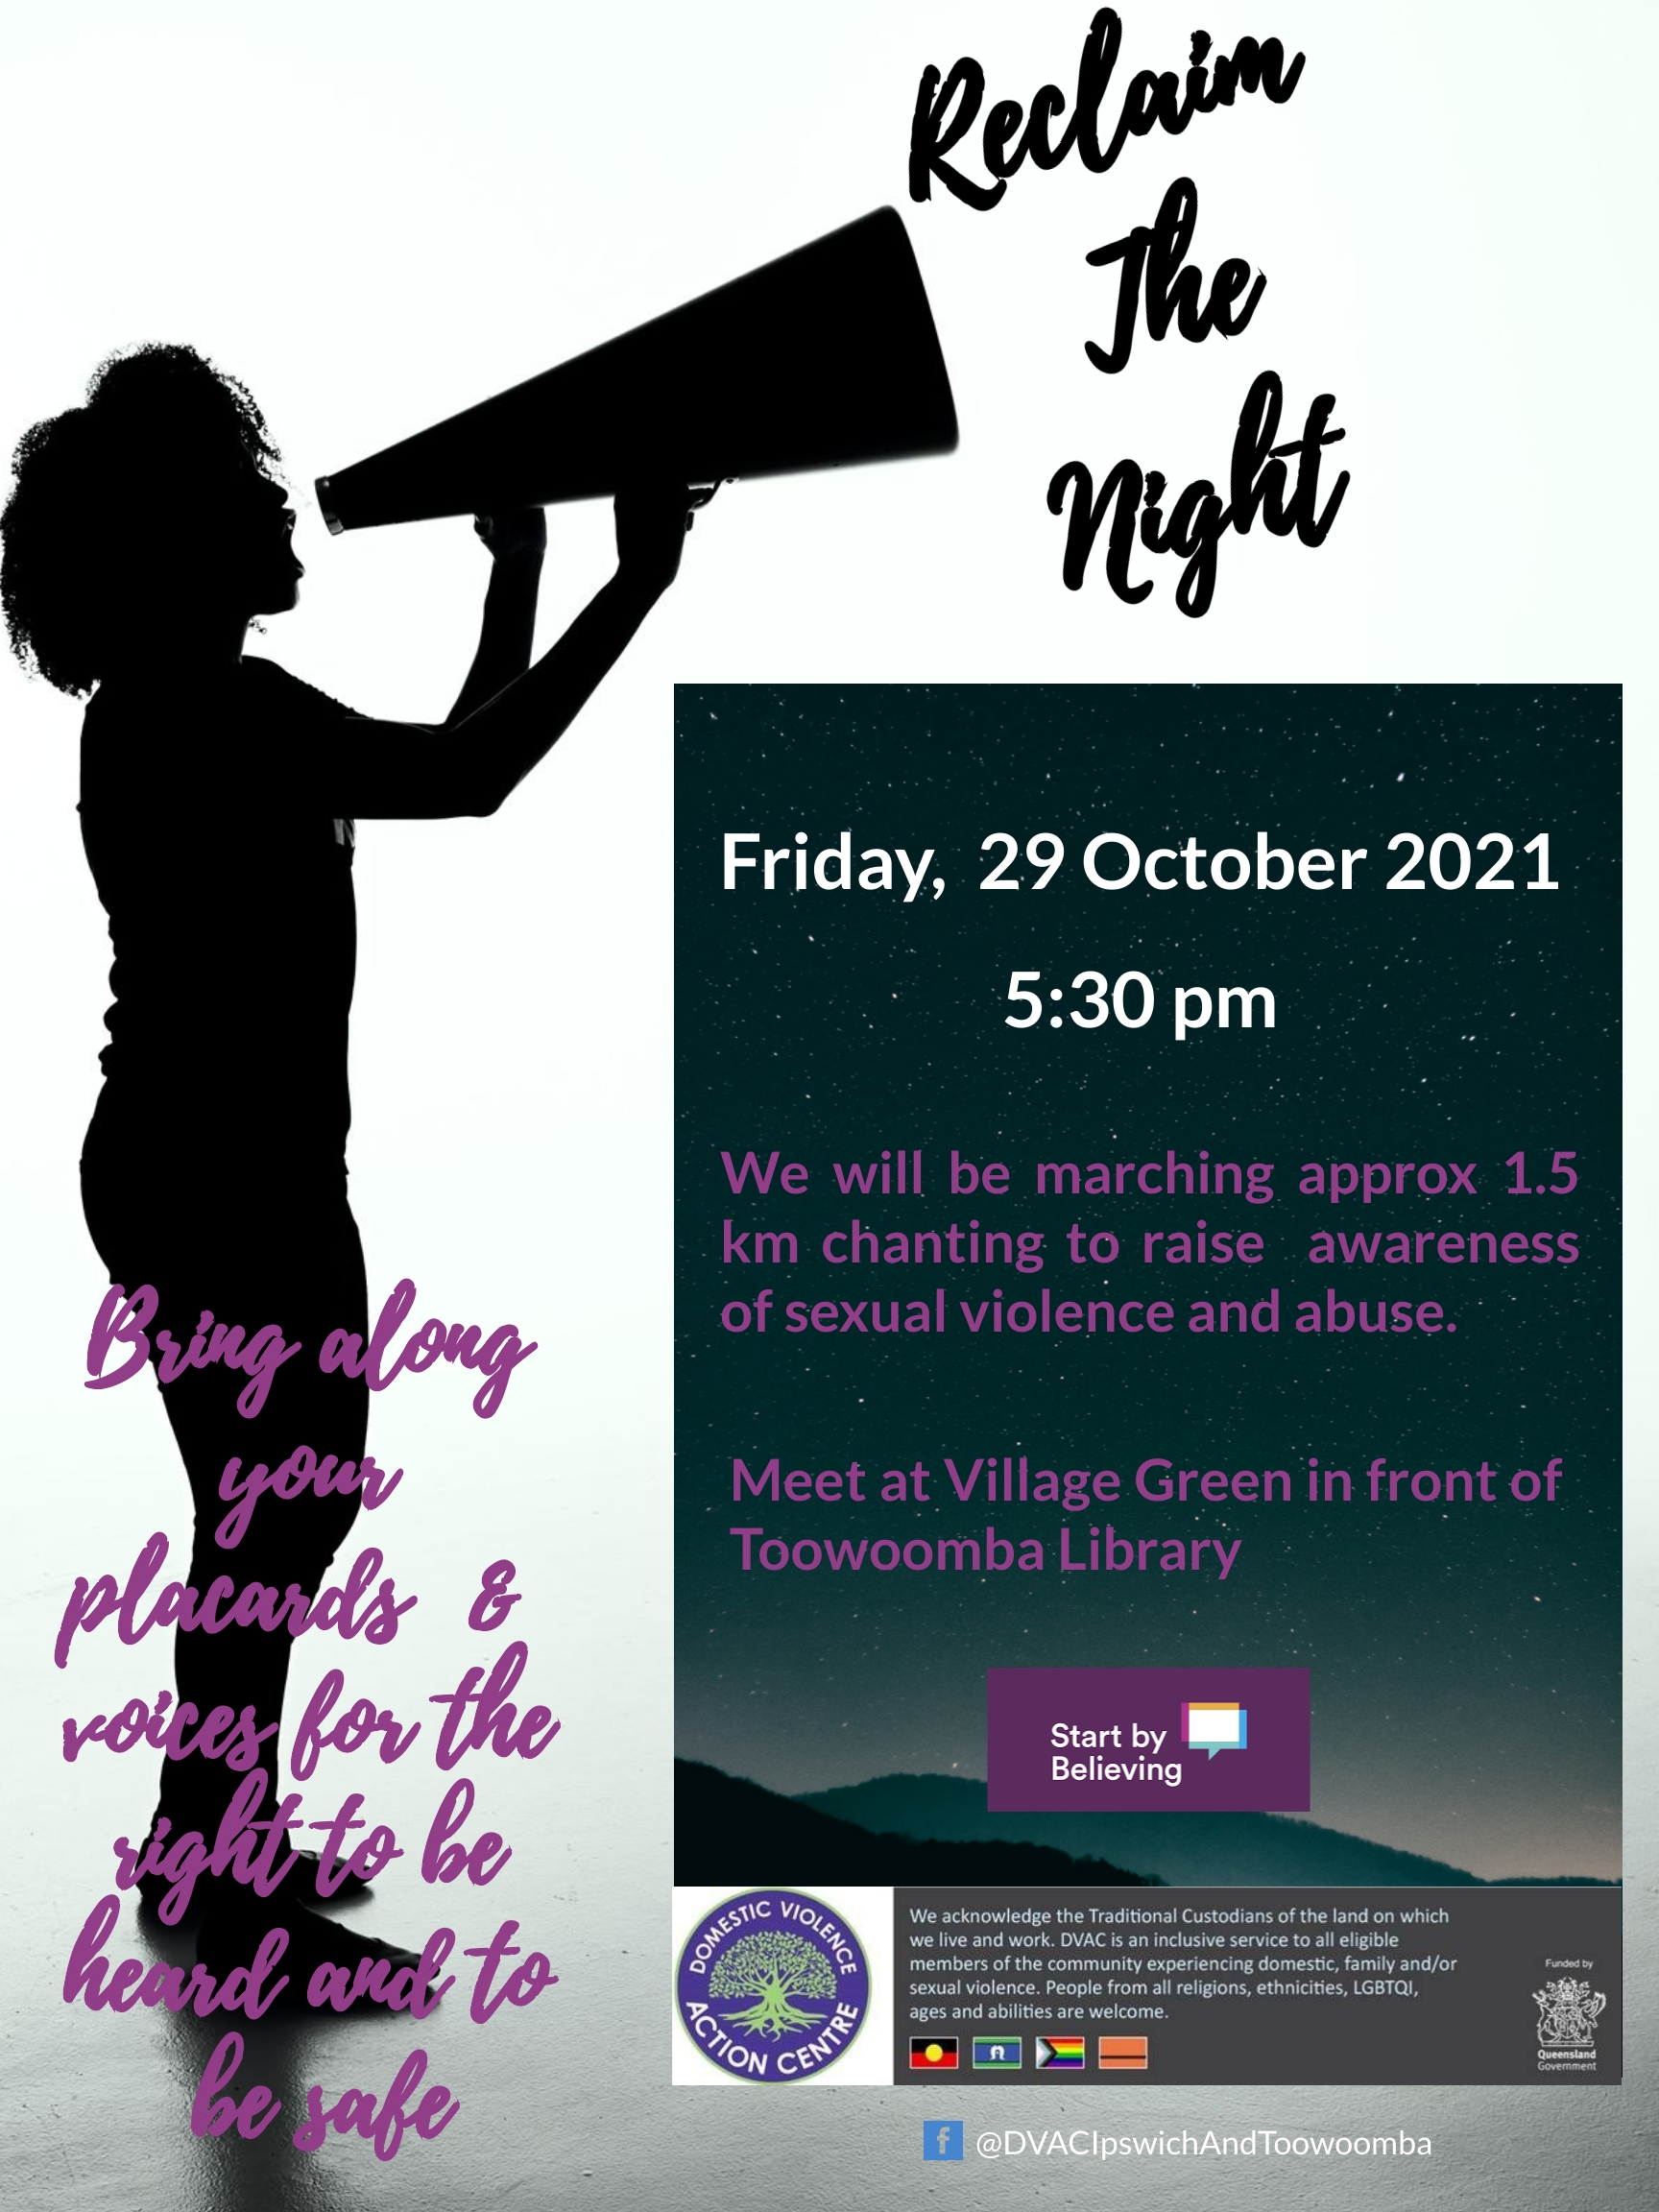 Silhouette of a figure with frizzy hair shouting into a megaphone with the words Reclaim The Night along with details of the event